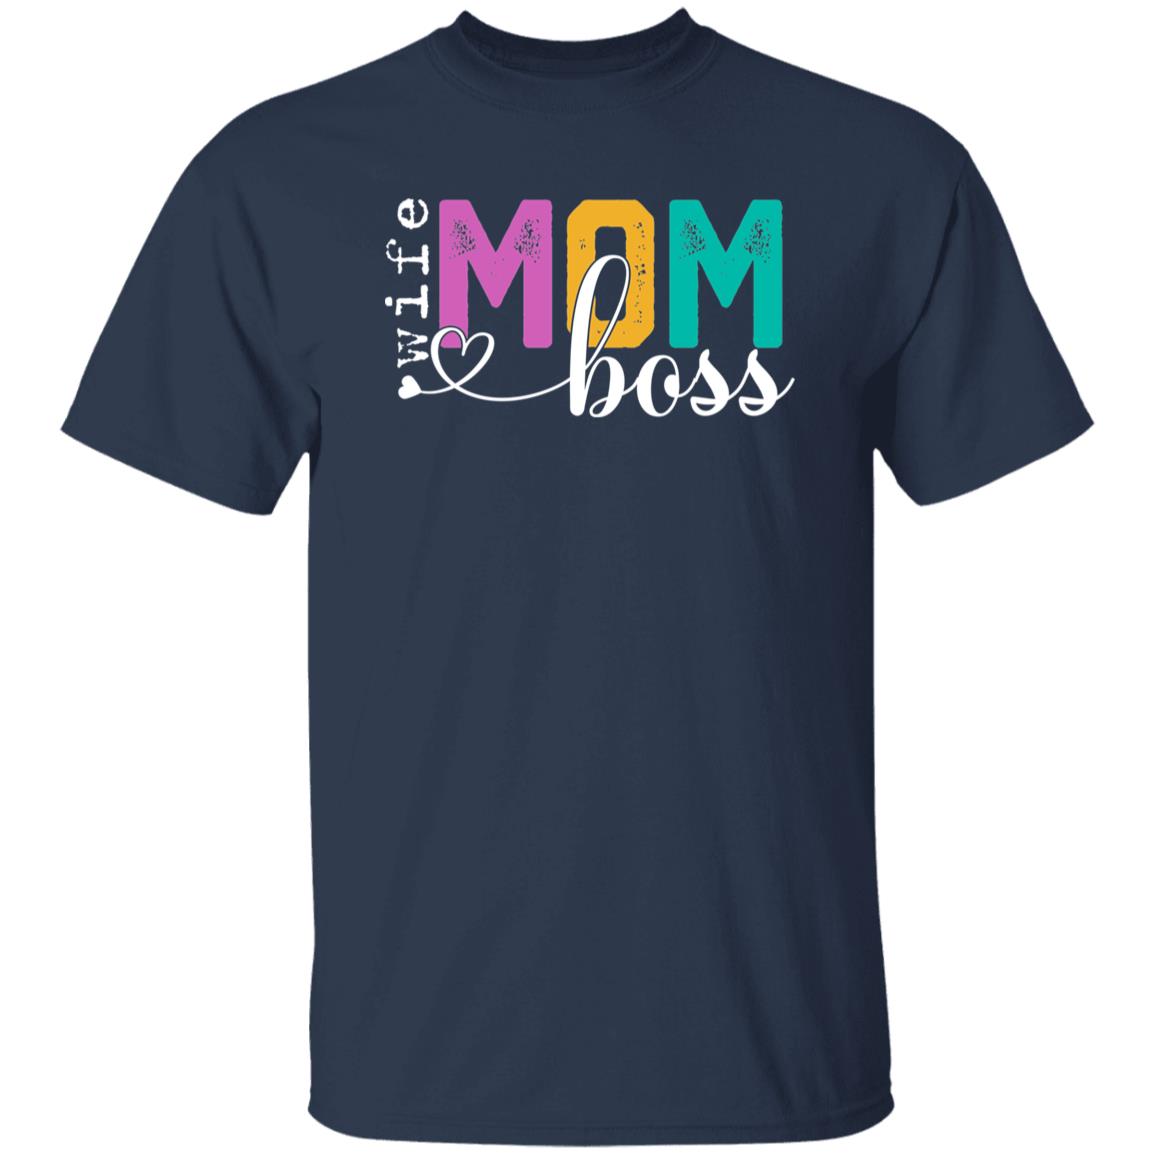 Wife Mom Boss Gift Shirt For Mothers Day